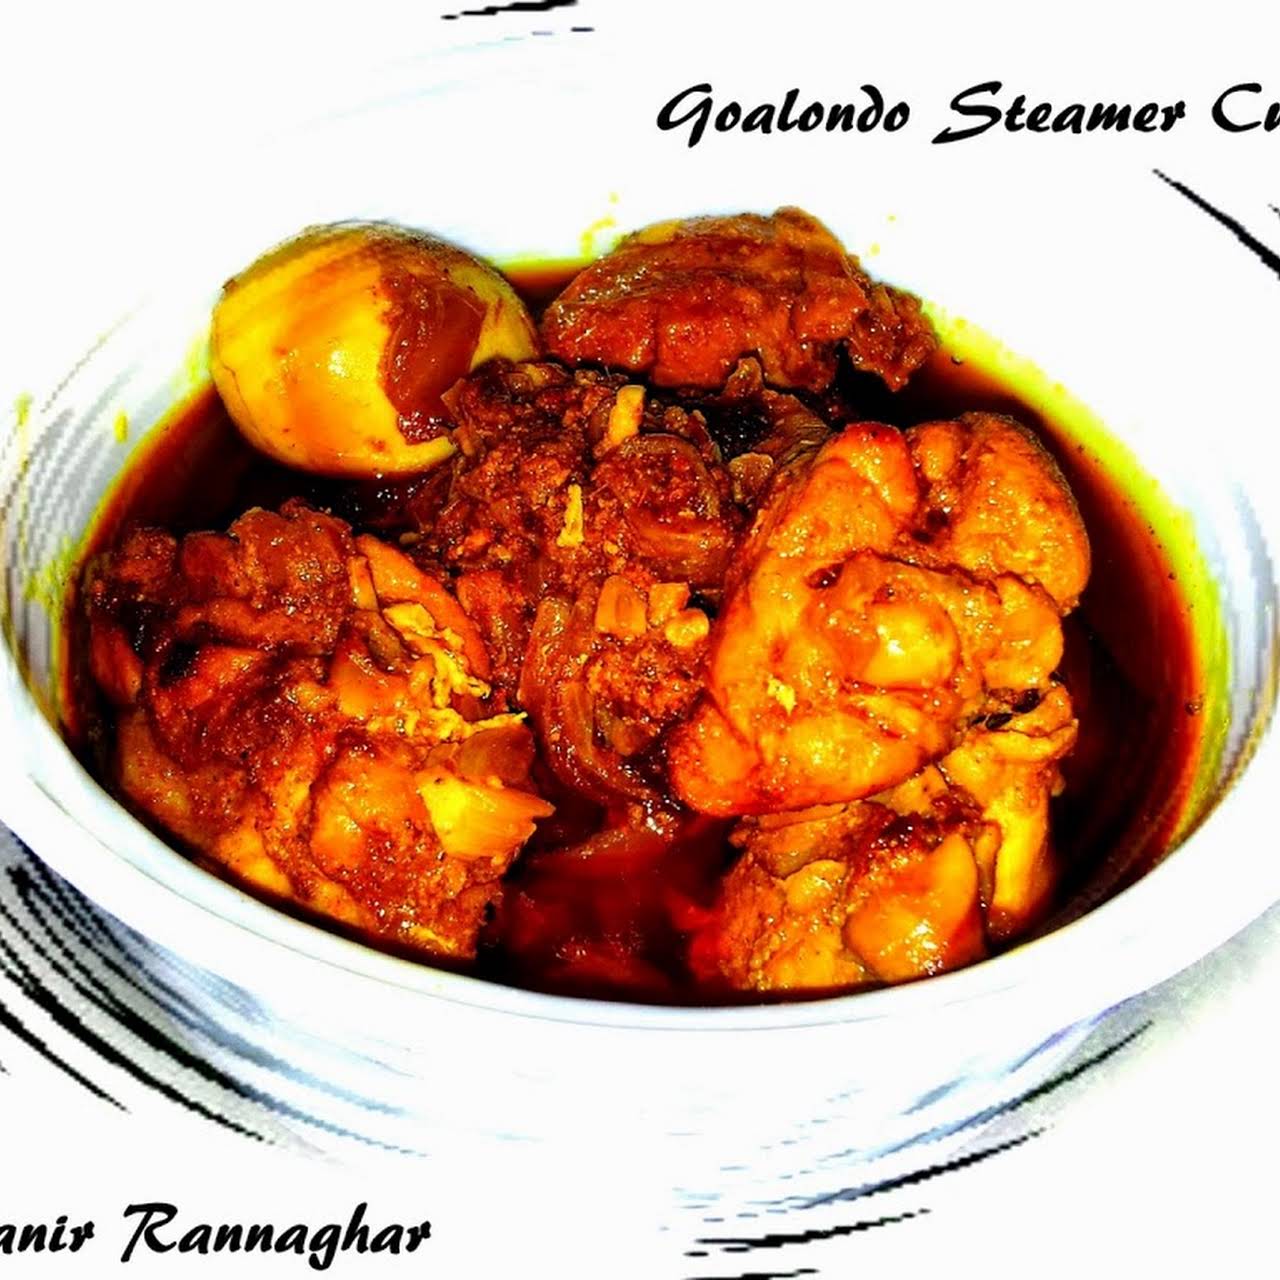 Goalondo Steamer Curry or Boatman Style Chicken Curry